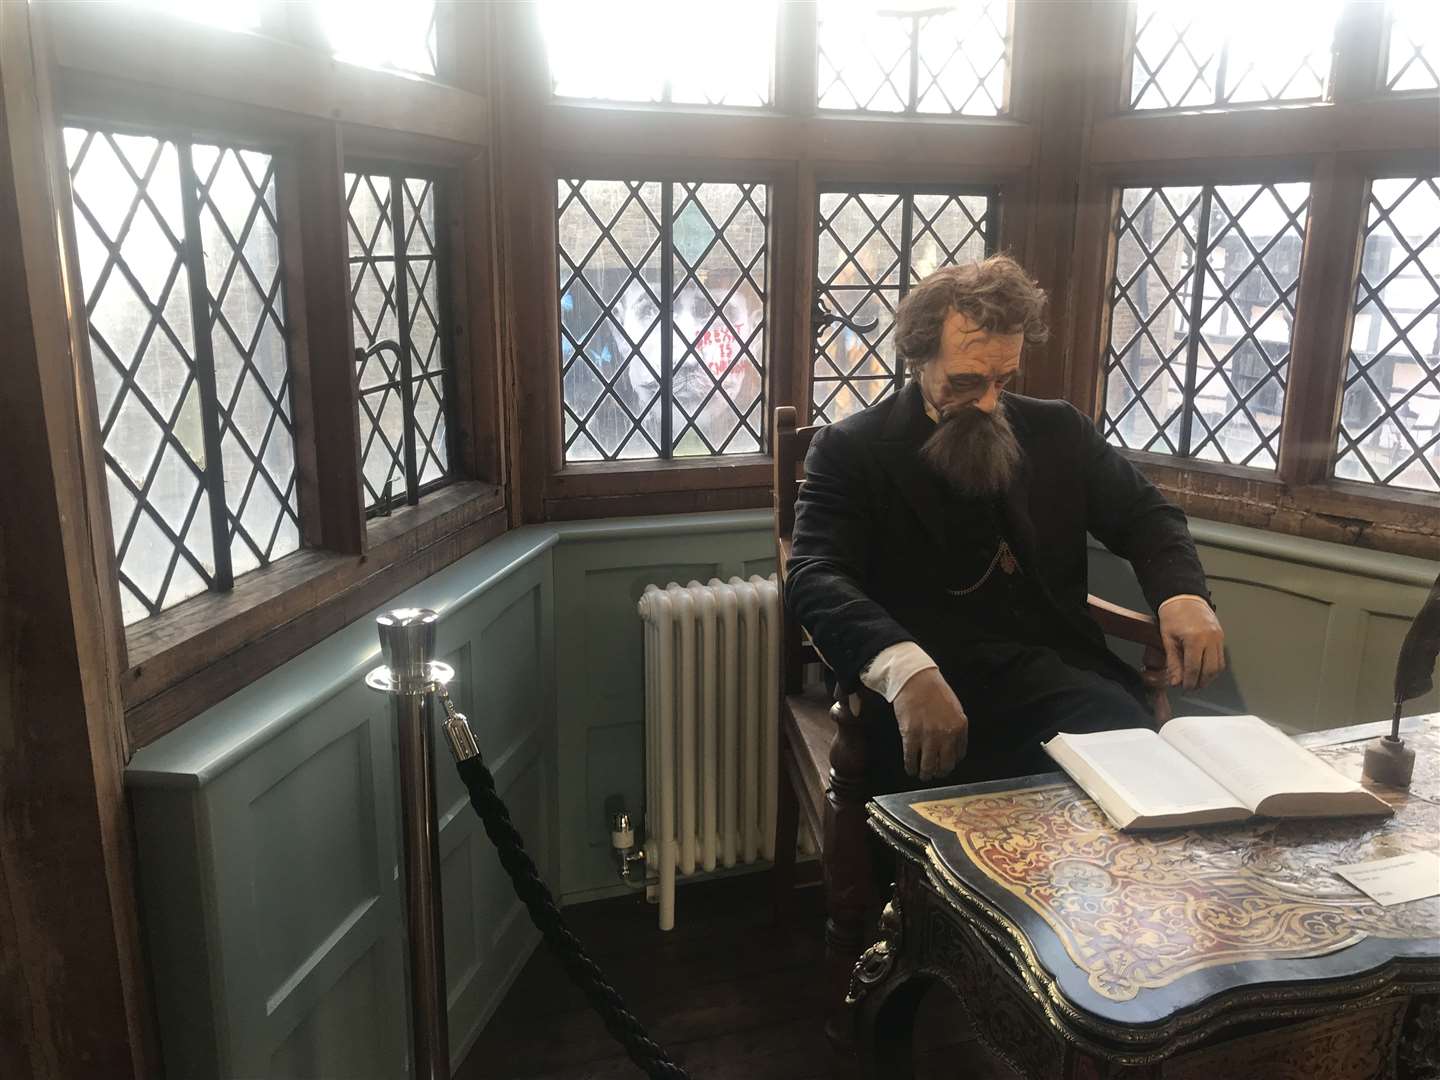 Dickens himself - or a lifelike model - takes centre stage in Eastgate House's Dickens Room, while Billy Childish's face looms in from a mural across the street